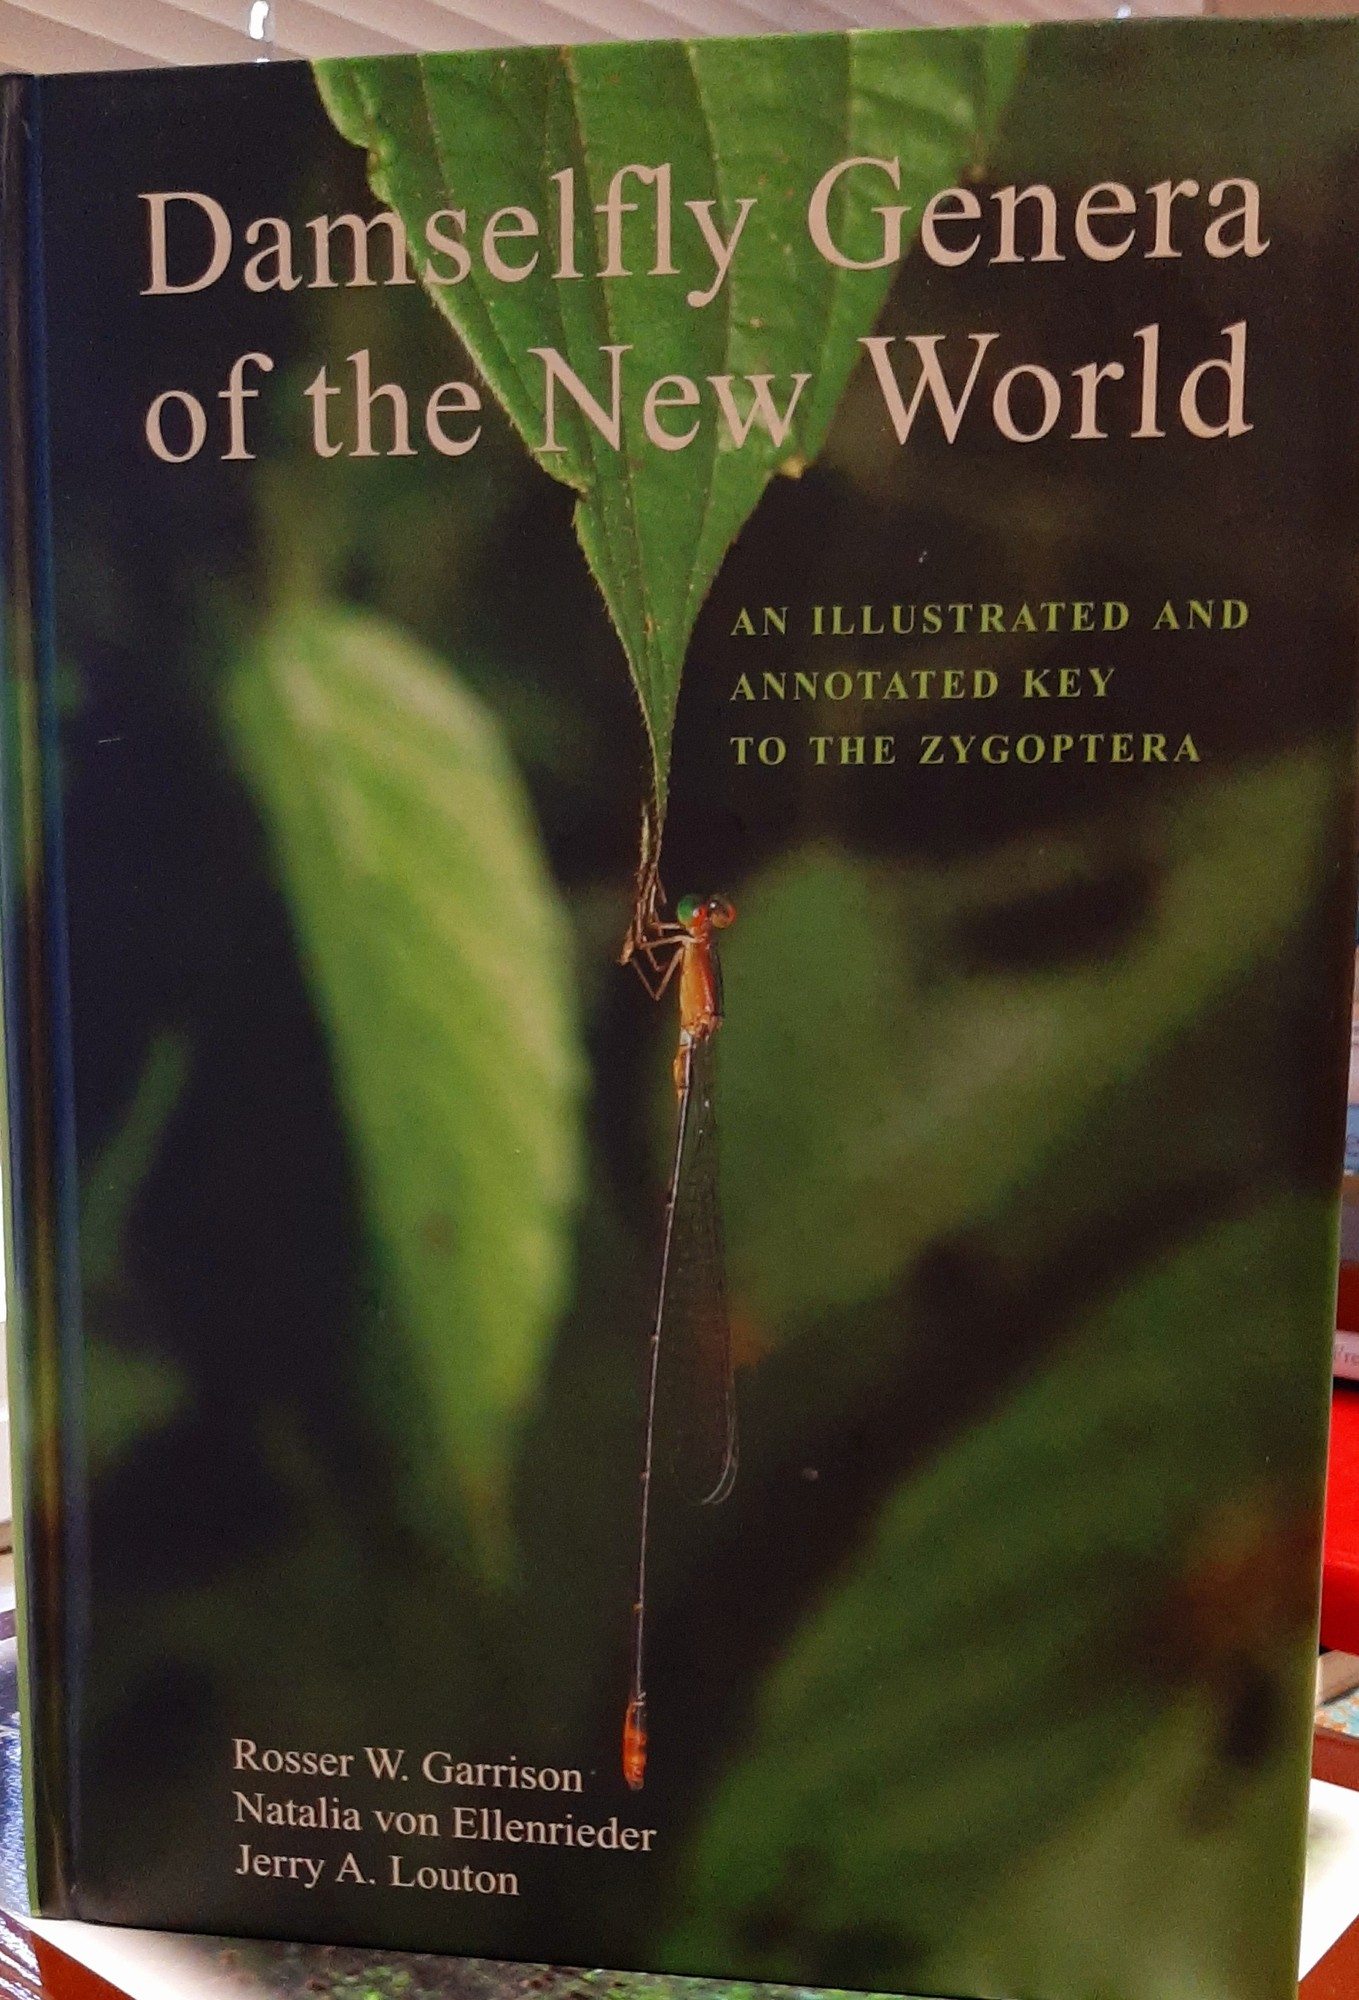 Rosser W. Garrison; Natalia von Ellenrieder; Jerry A. Louton: Dragonfly Genera of the New World. An illustrated and annotated key to the Zygoptera (Rippl-Rónai Múzeum CC BY-NC-ND)